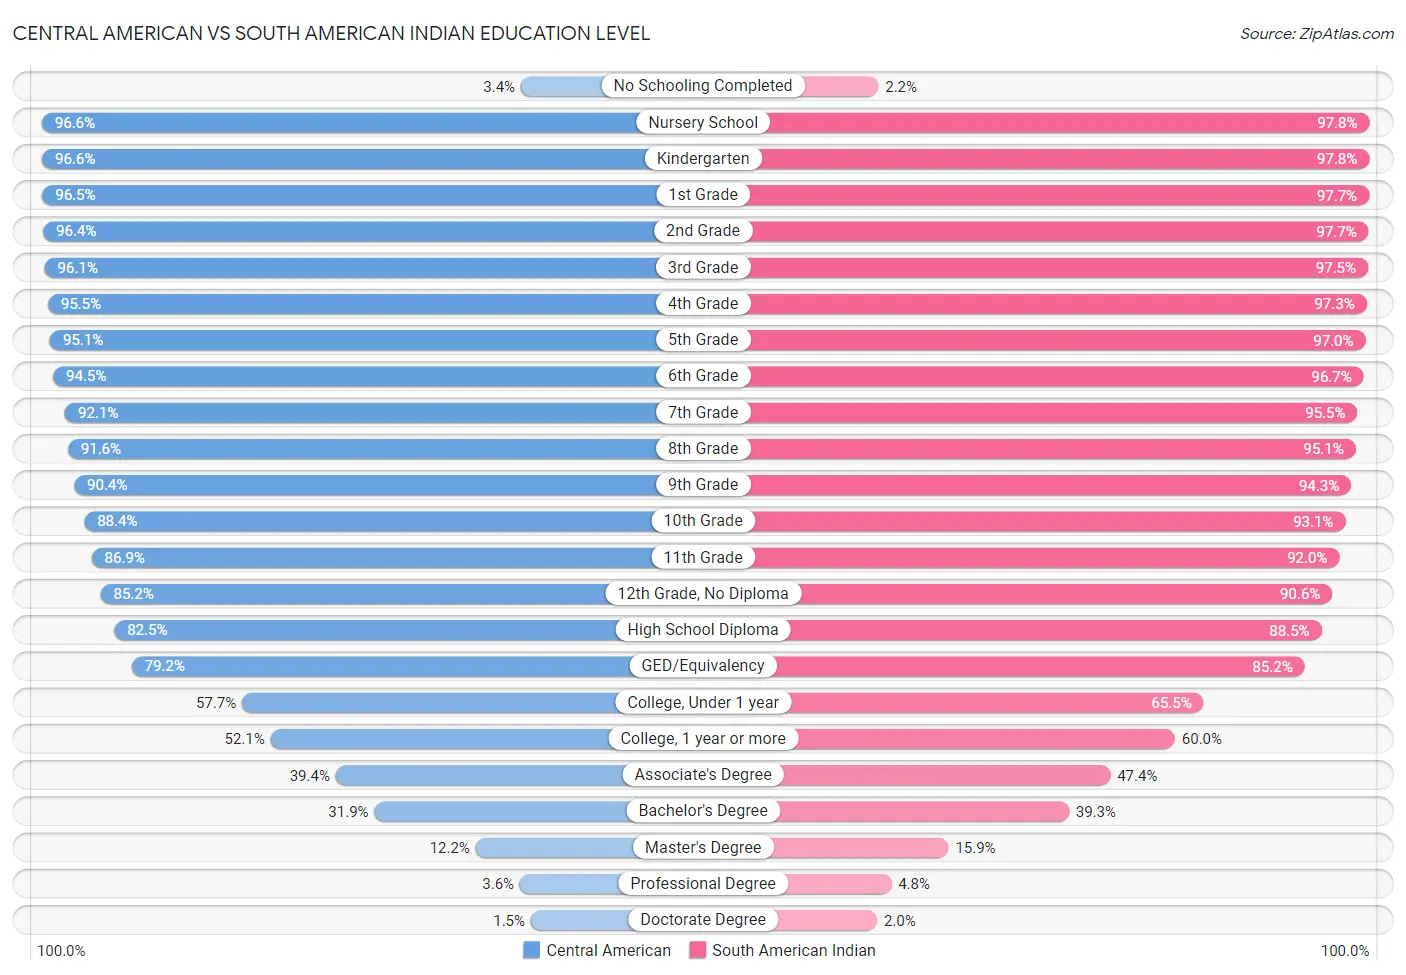 Central American vs South American Indian Education Level